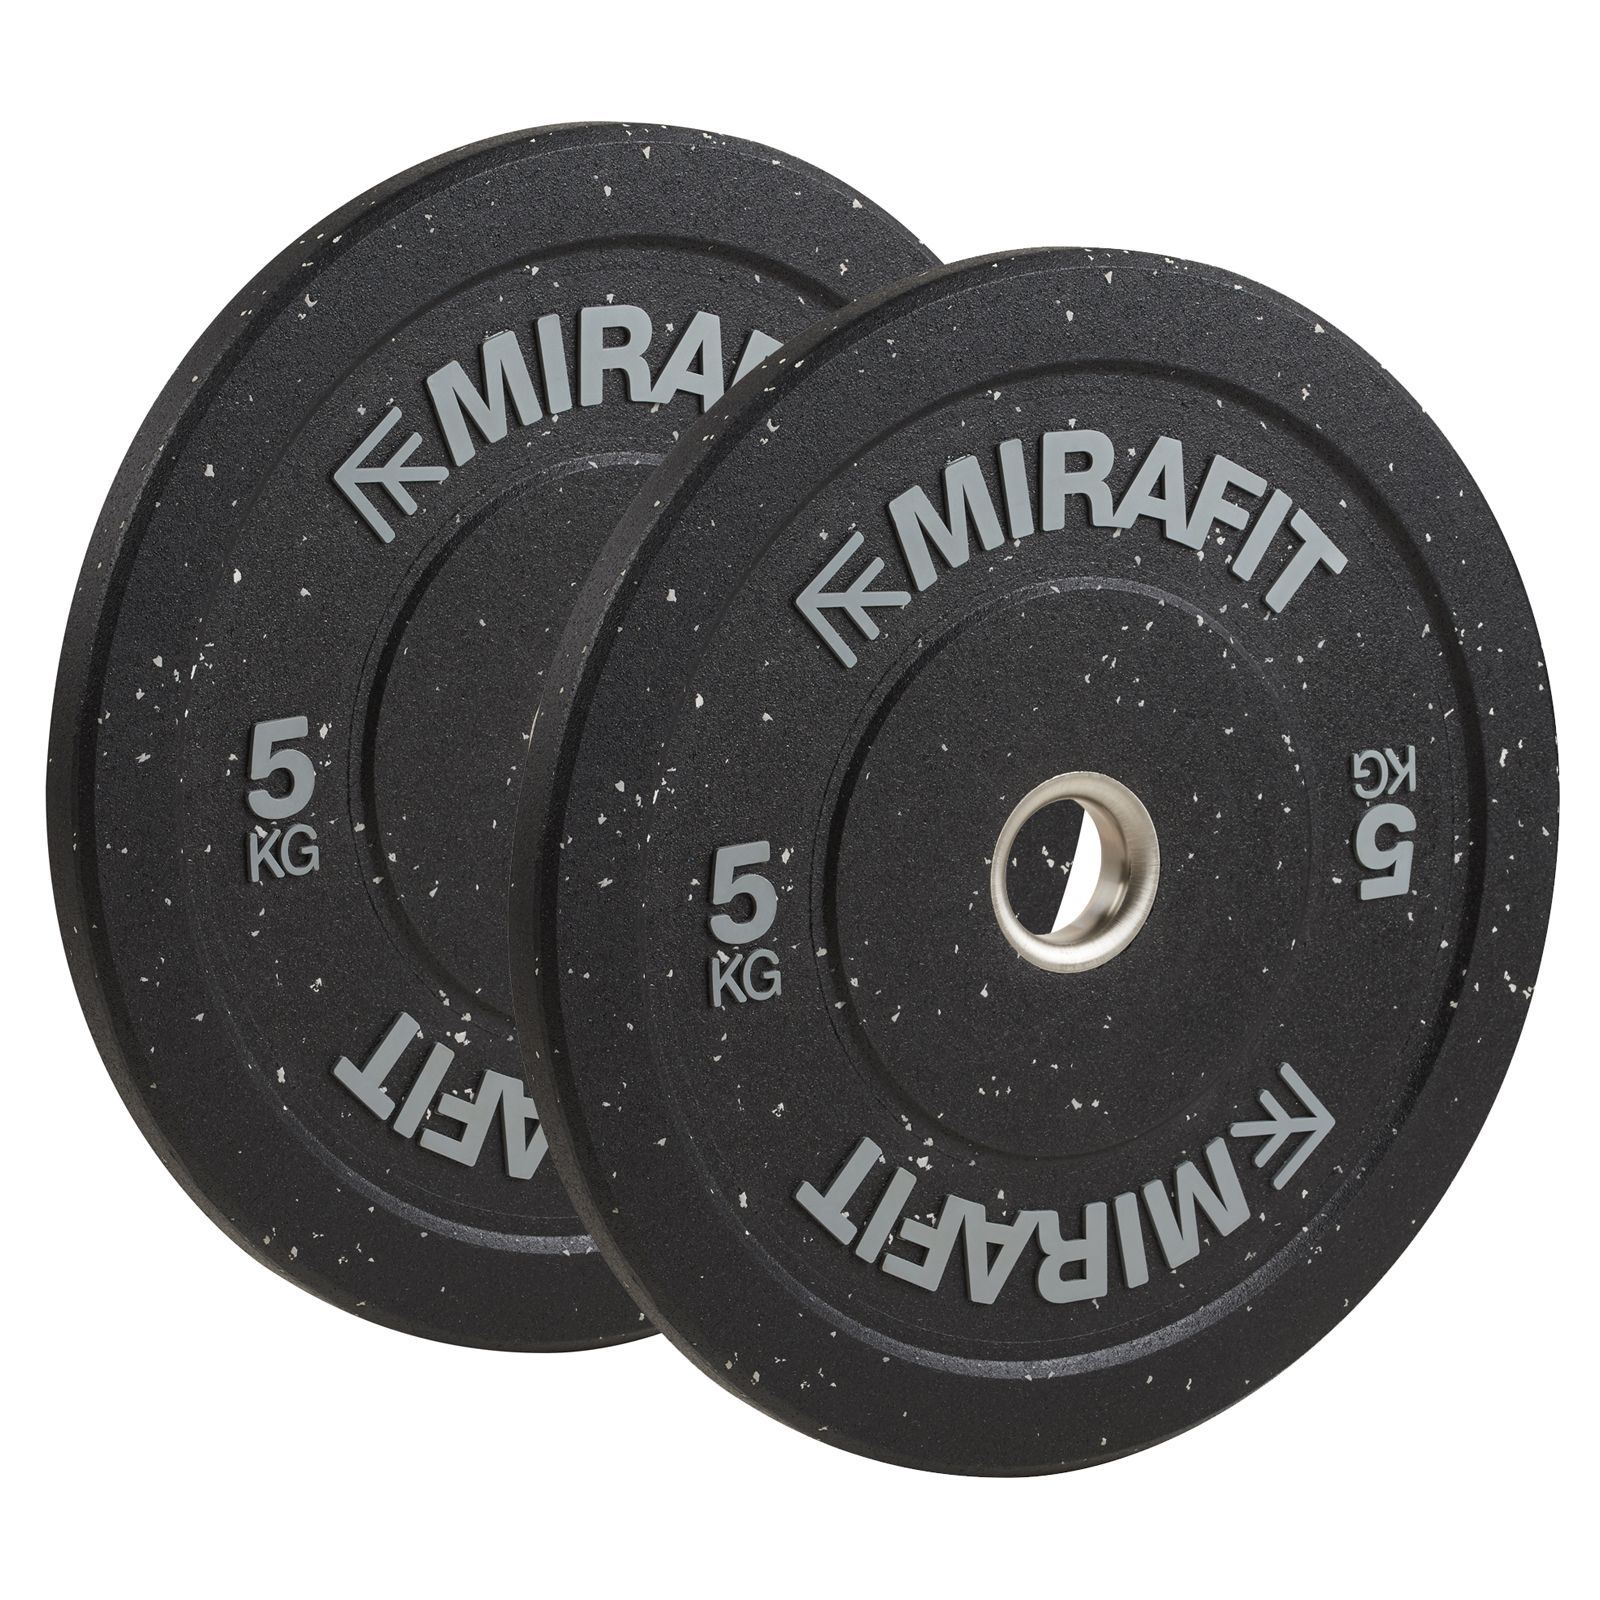 Mirafit Coloured Crumb Rubber Olympic Bumper Plates 5kg Review